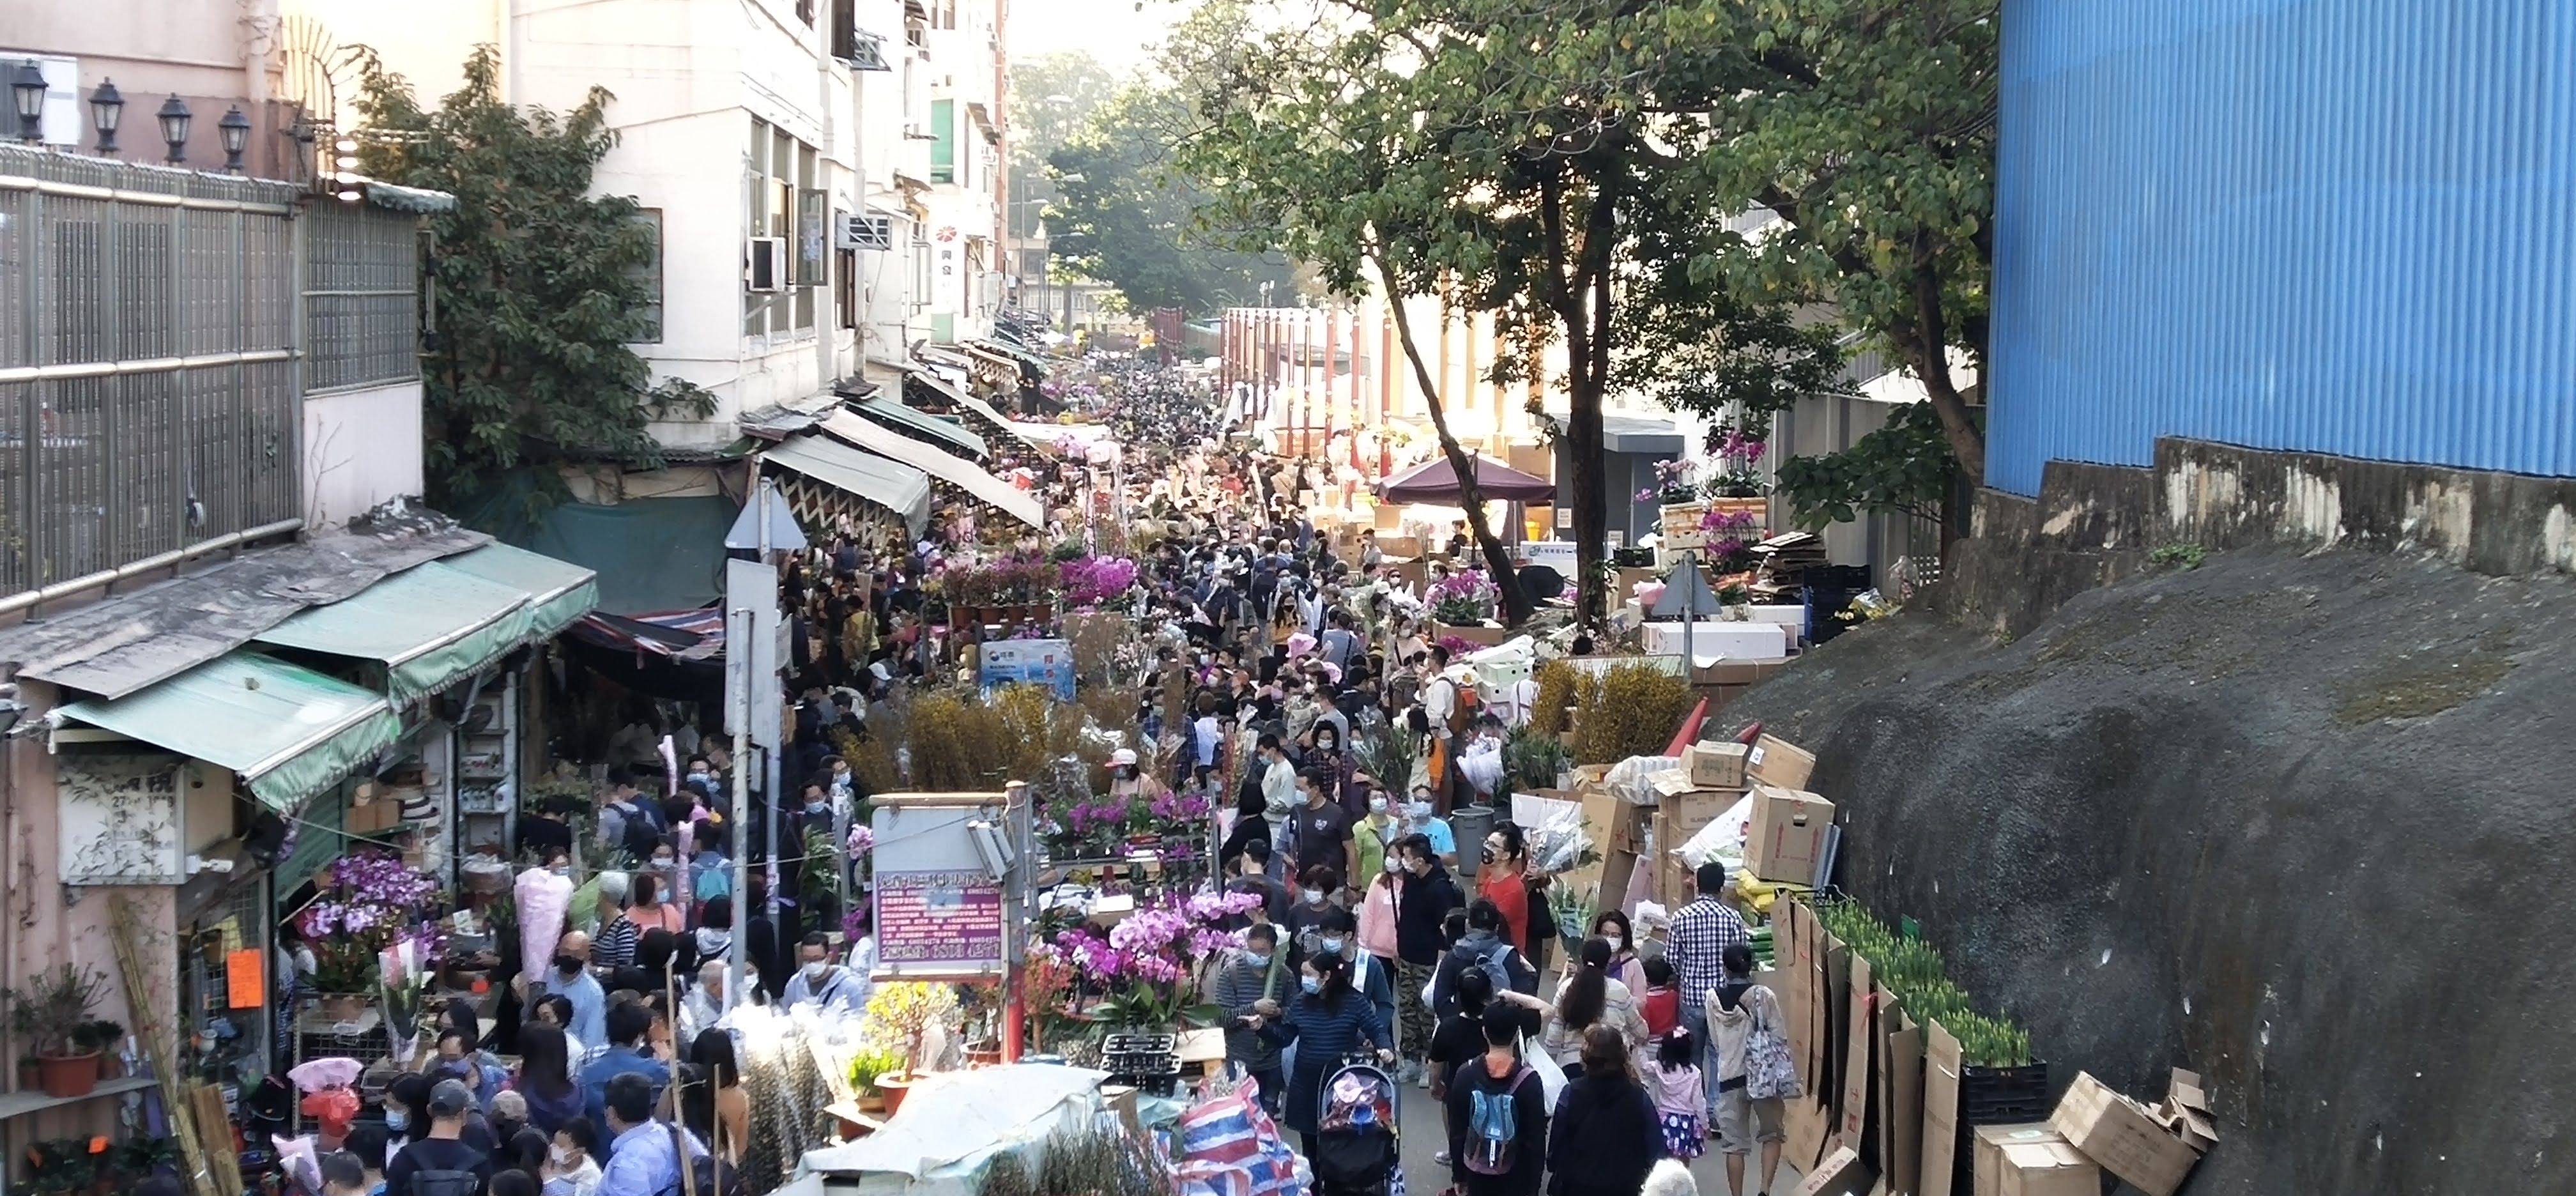 It is too crowded at Mong Kok's Flower Market